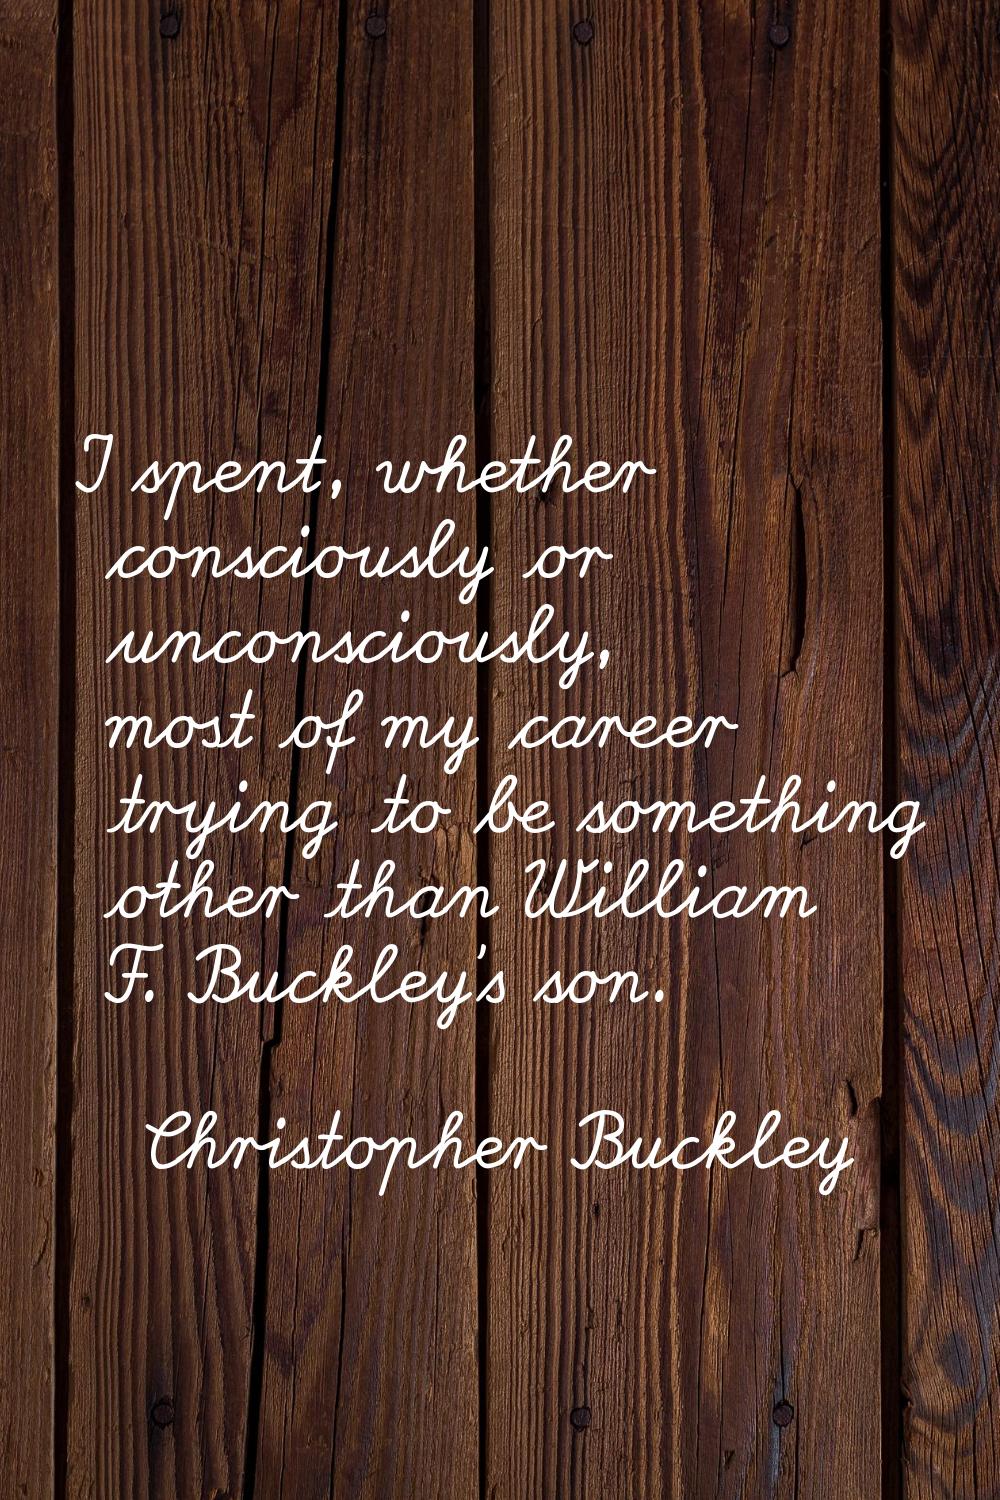 I spent, whether consciously or unconsciously, most of my career trying to be something other than 